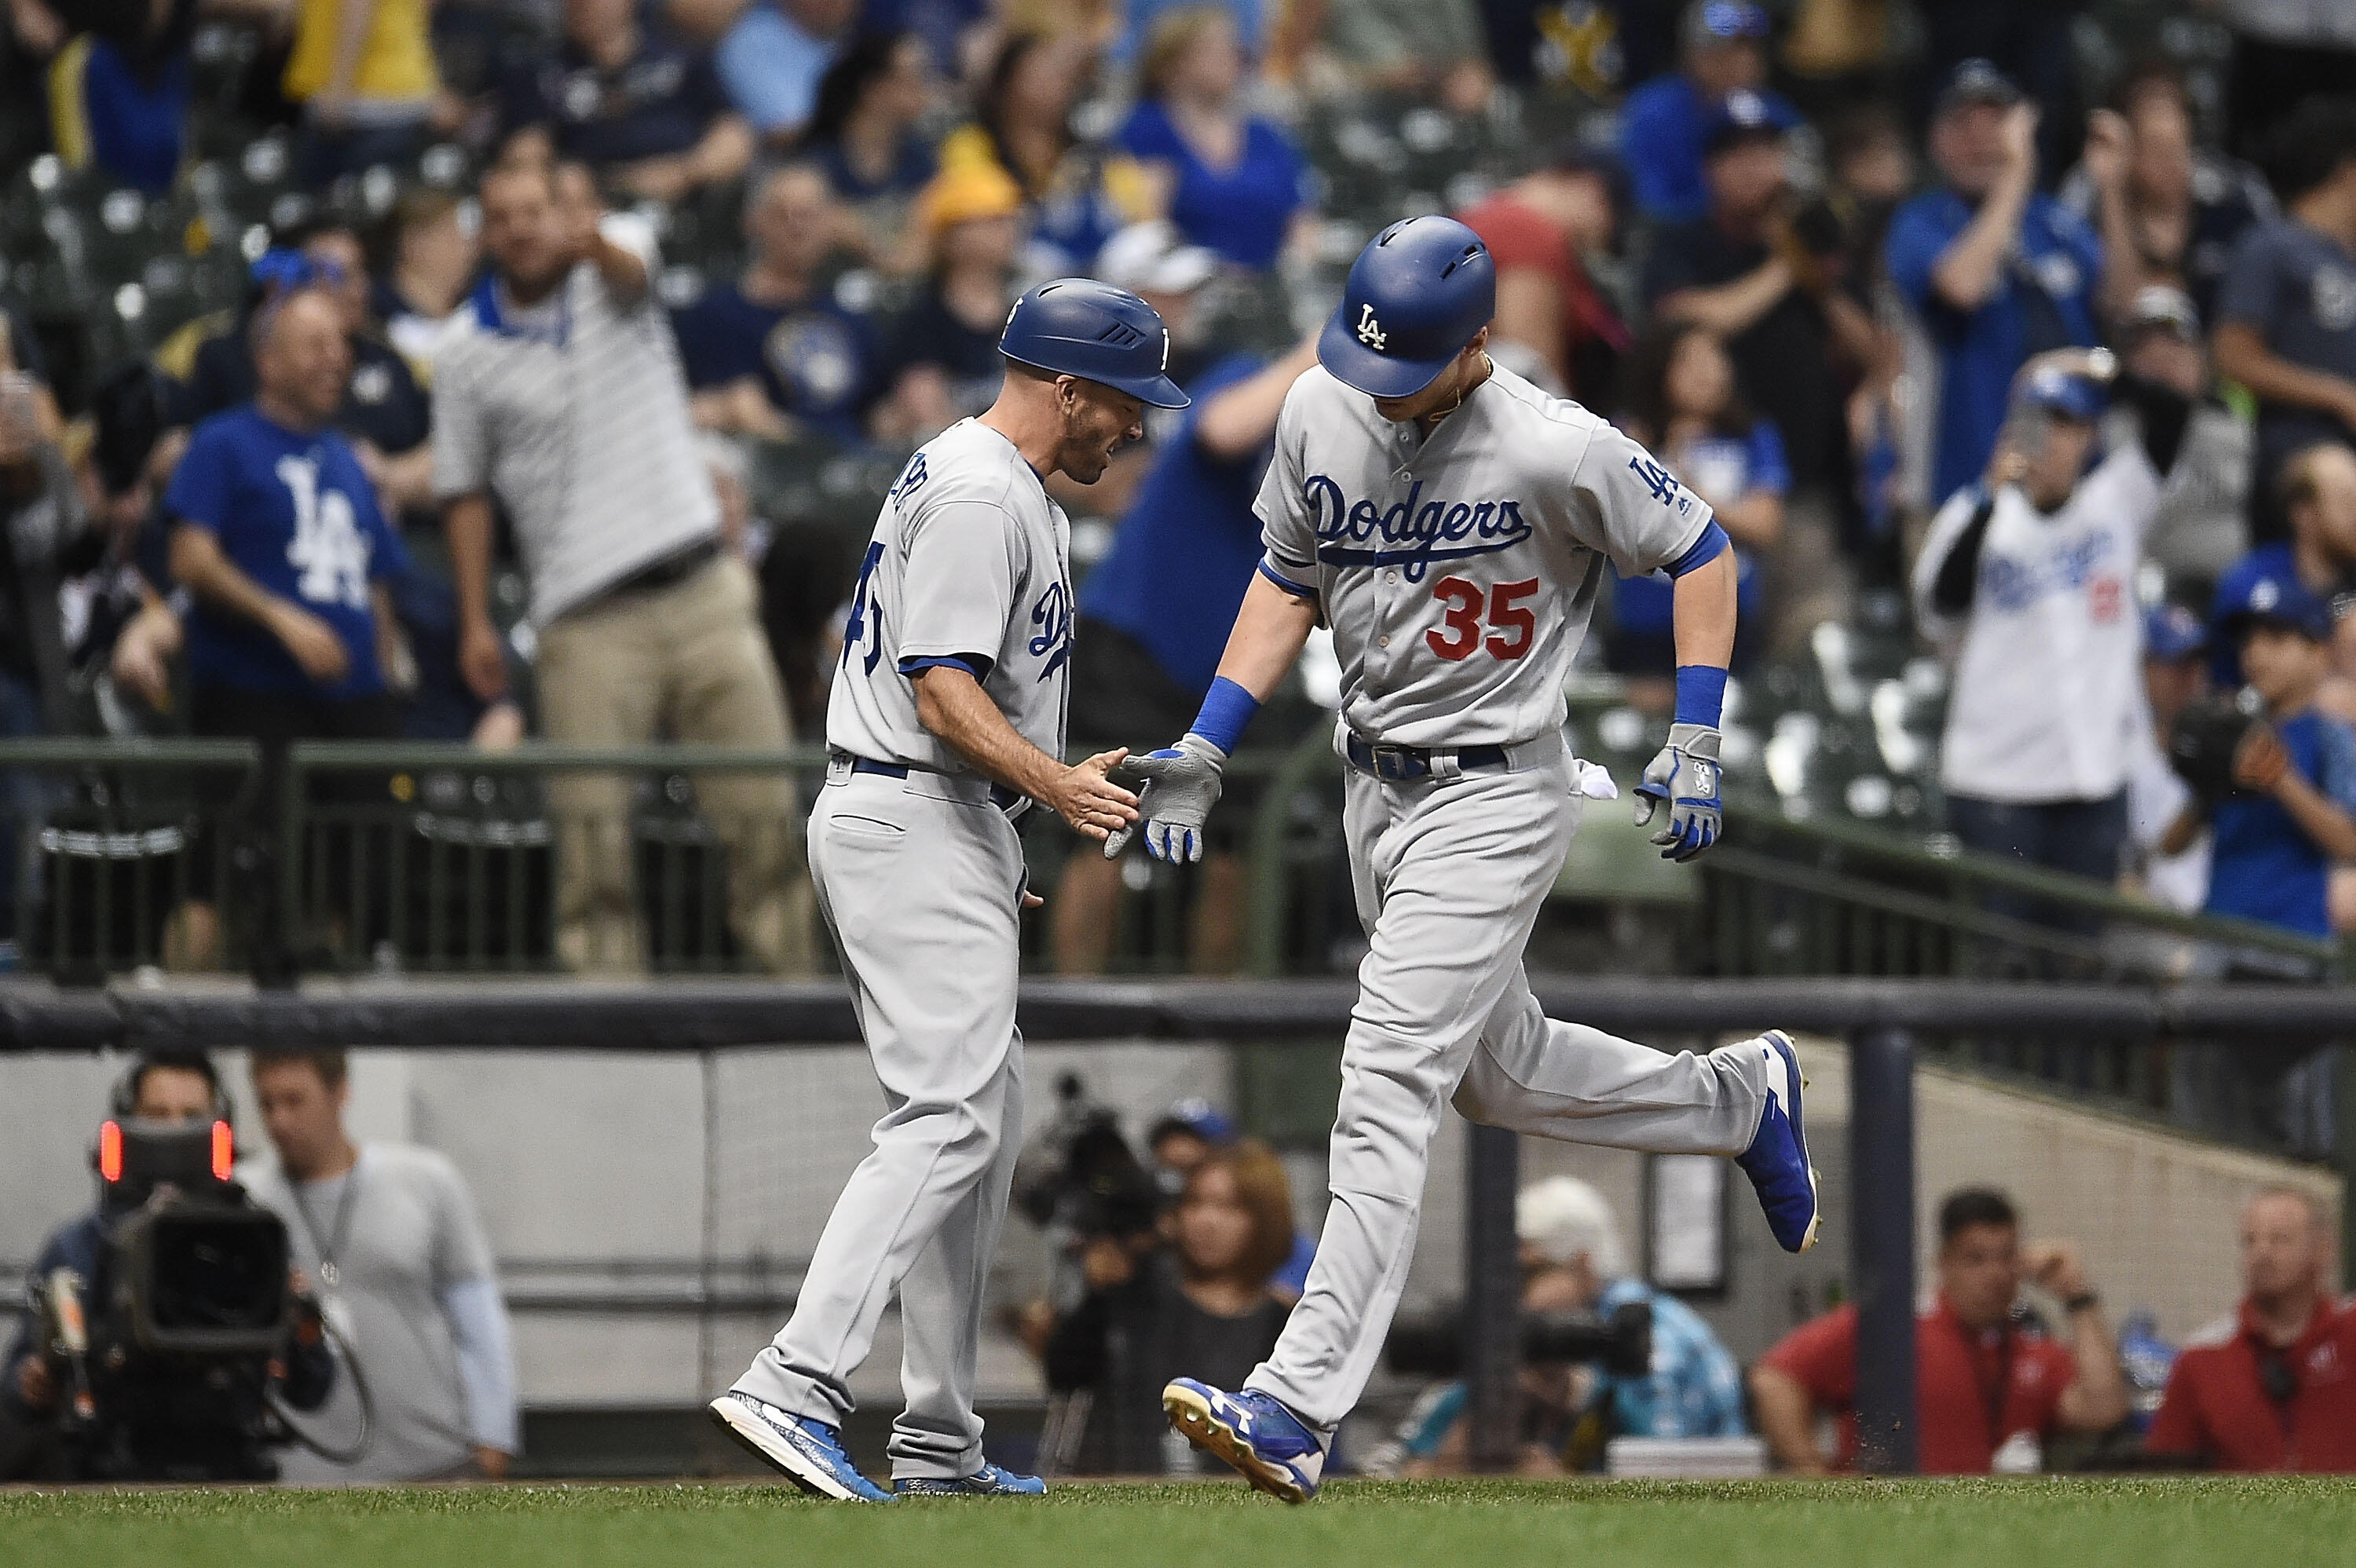 MILWAUKEE, WI - JUNE 02:  Cody Bellinger #35 of the Los Angeles Dodgers is congratulated by third base coach Chris Woodward #45 following a home run during the twelfth inning of a game against the Milwaukee Brewers at Miller Park on June 2, 2017 in Milwau